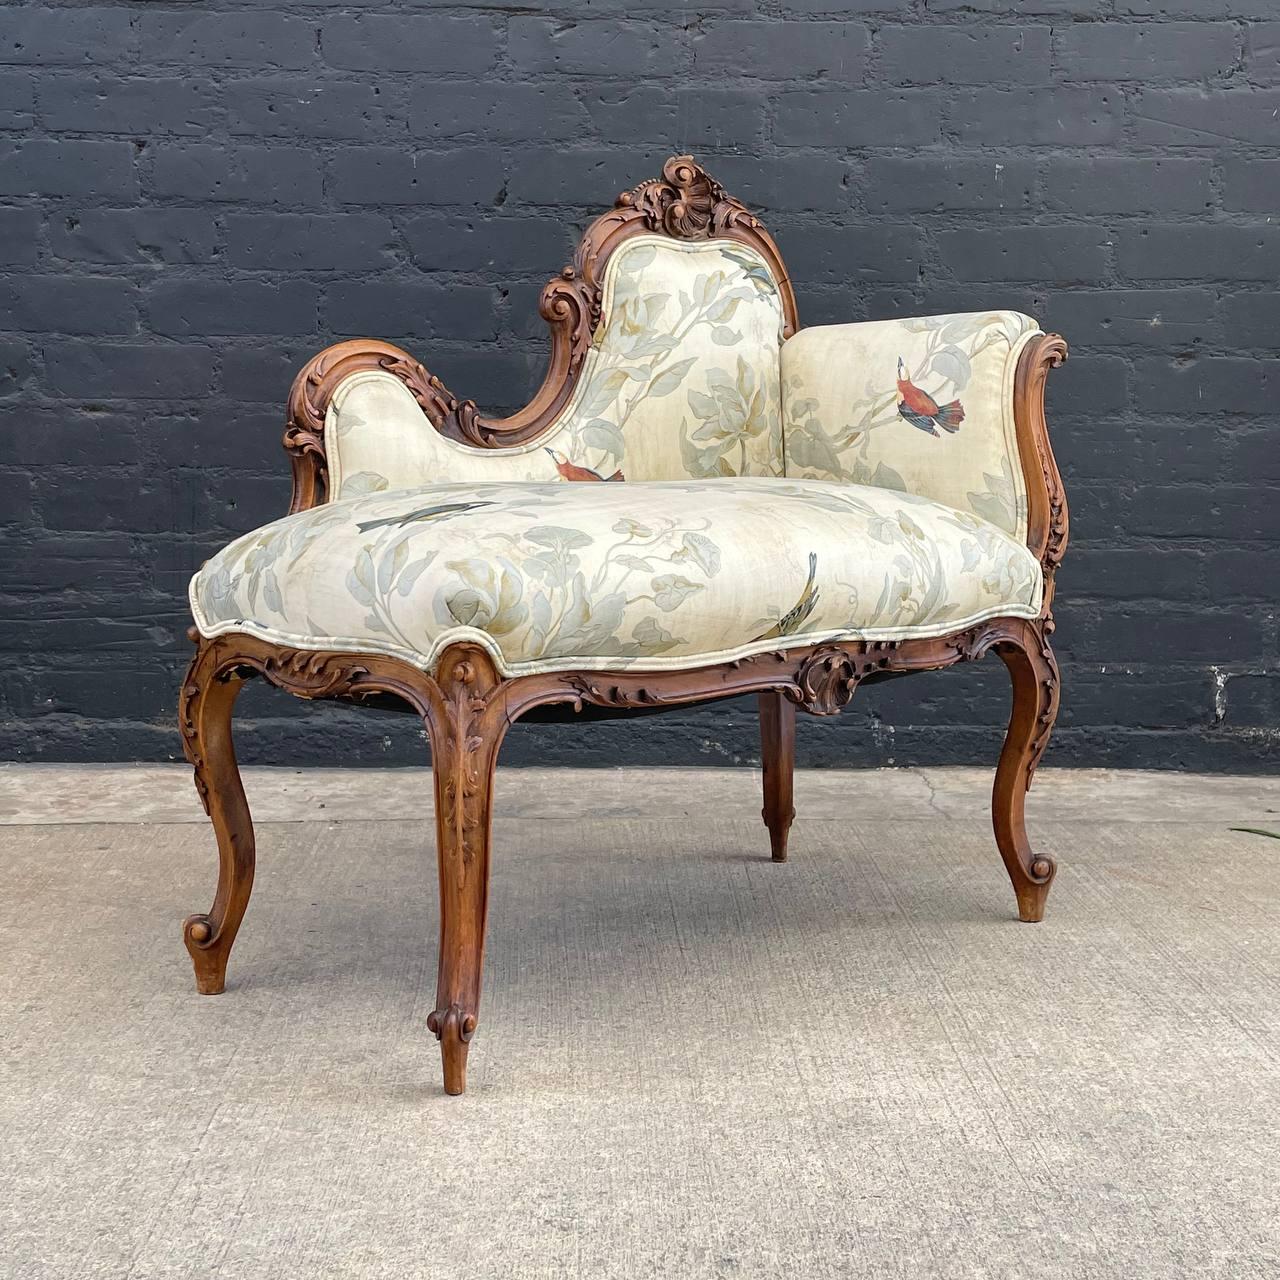 Antique French Louis XV Walnut Petite Chaise Lounge

Original Vintage Condition
Year:  c.1940’s
Dimensions: 
34.50”H x 37”W x 18”D
Seat Height 19”